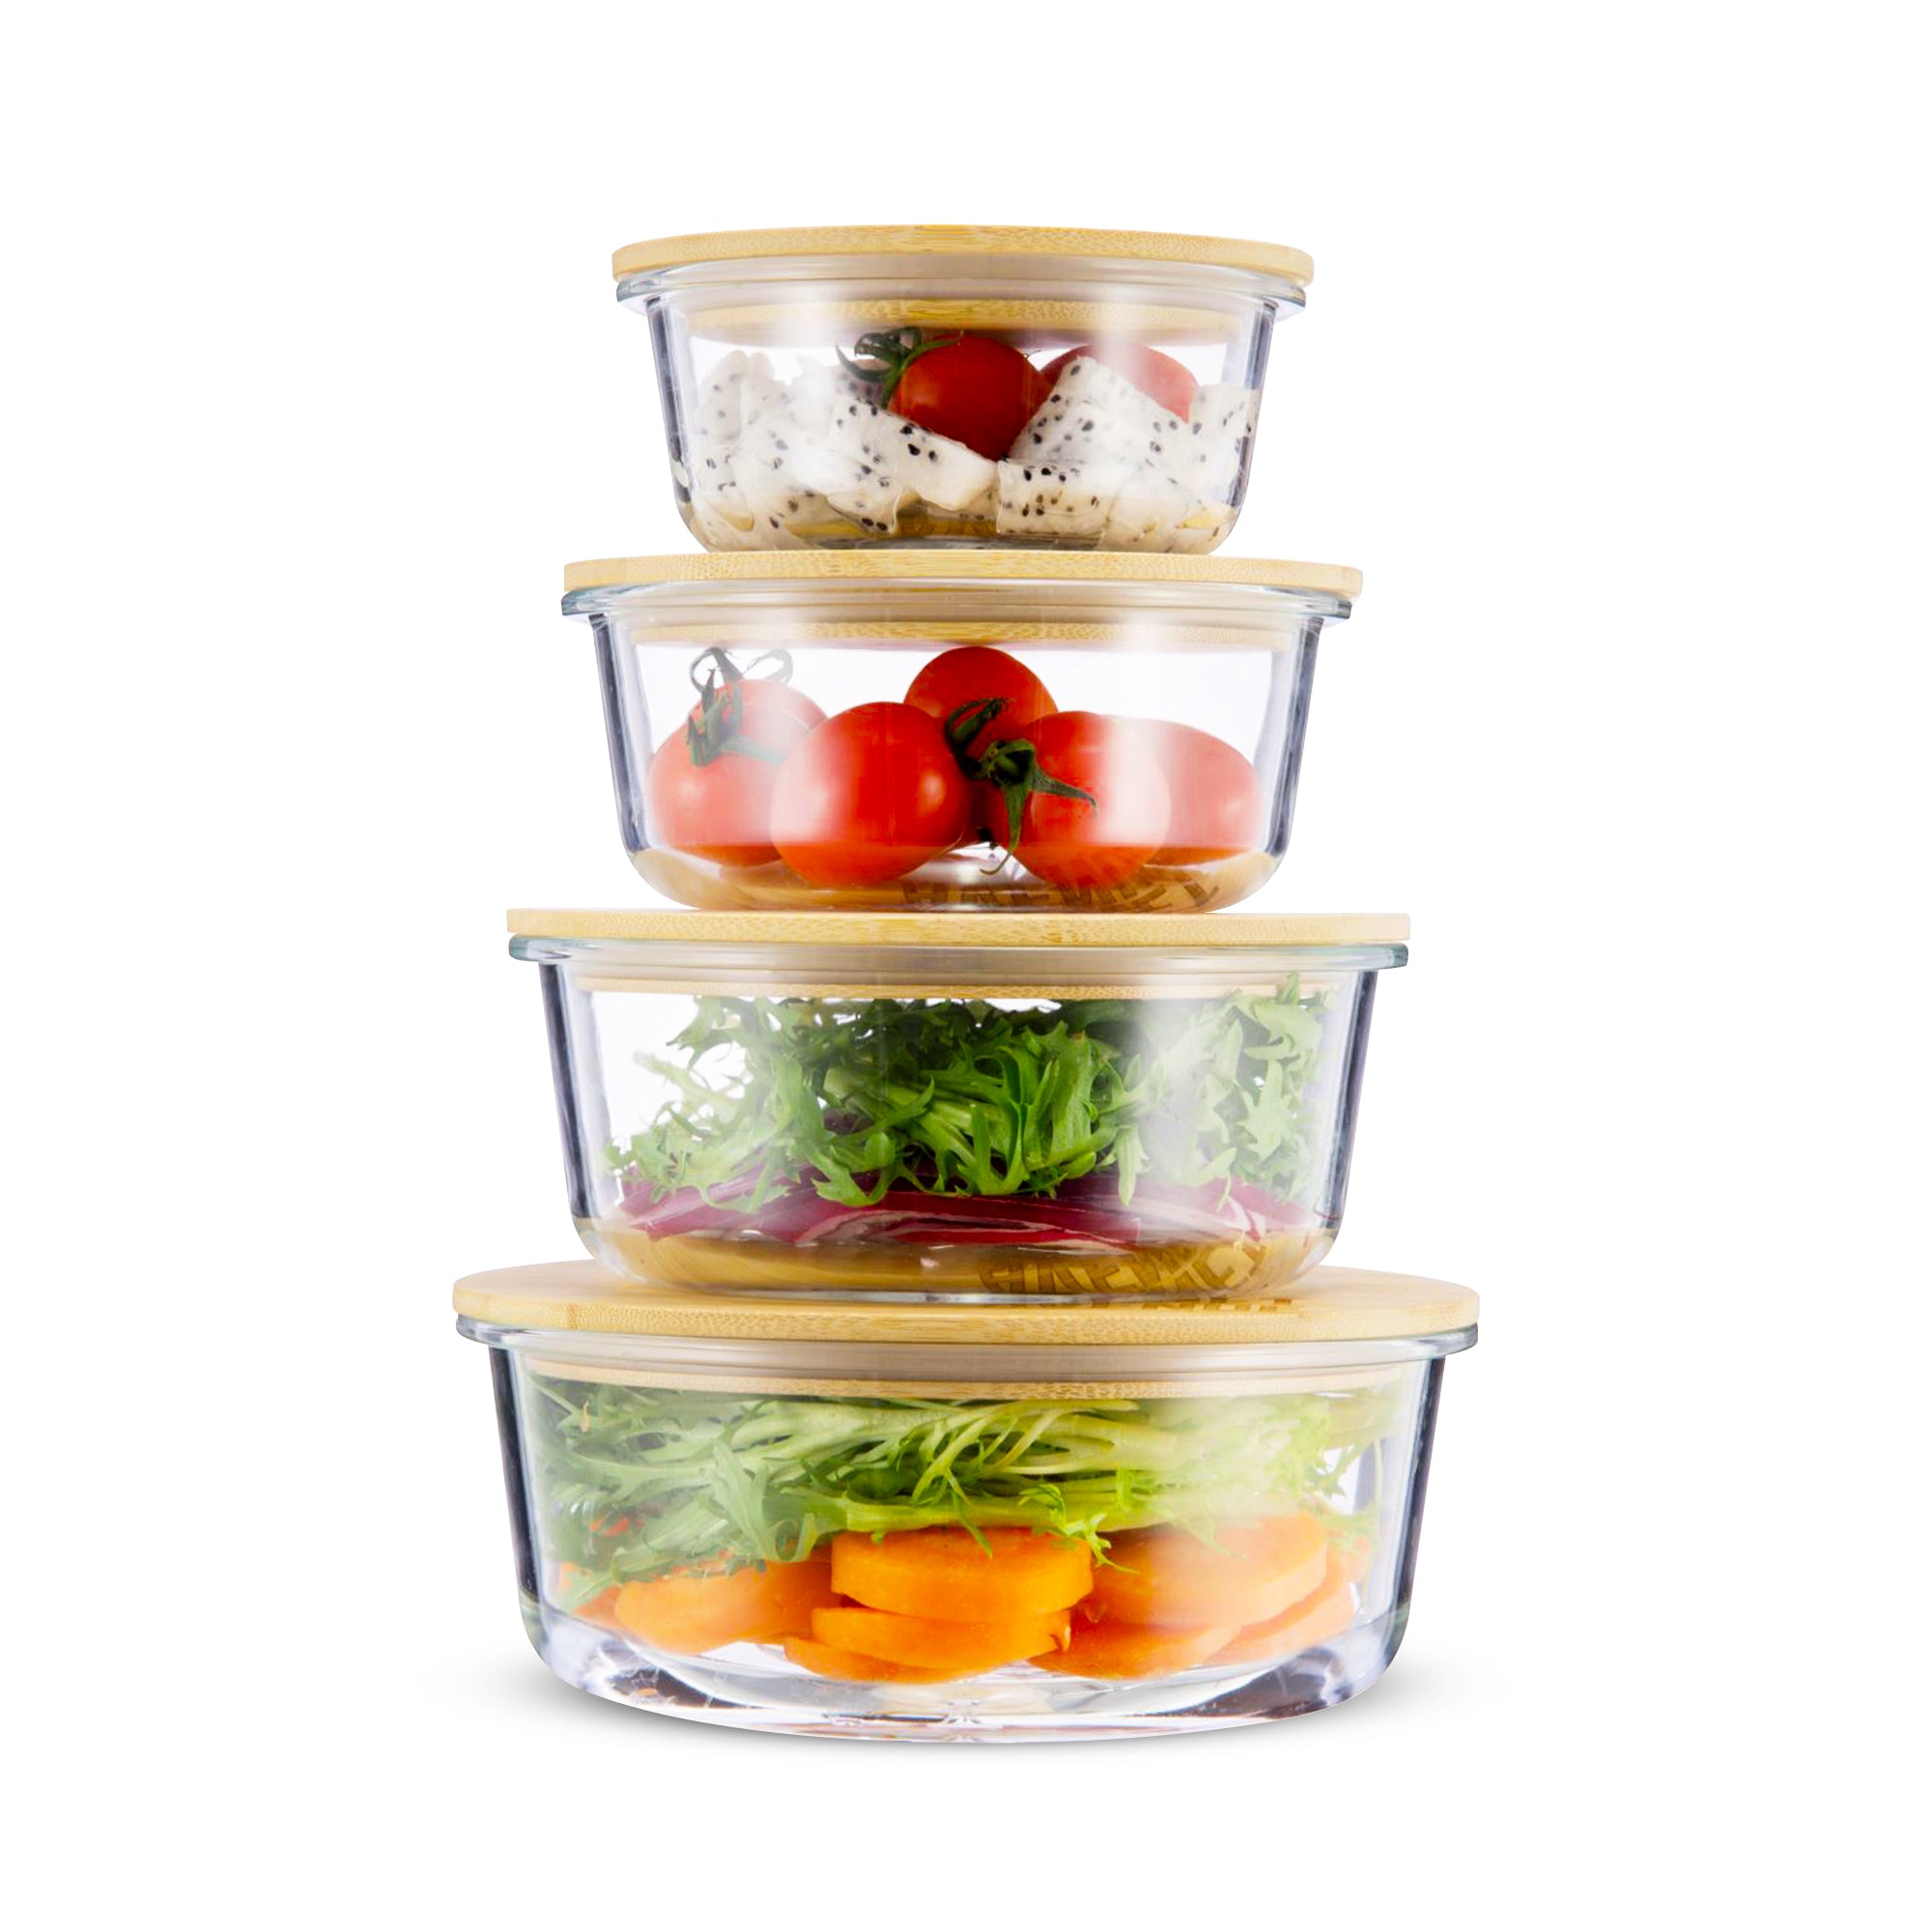 glass food container oven safe freezer storage with bamboo fork spoon lid -  Customized Glass Food Containers & Mug & Bowls Manufacturer .